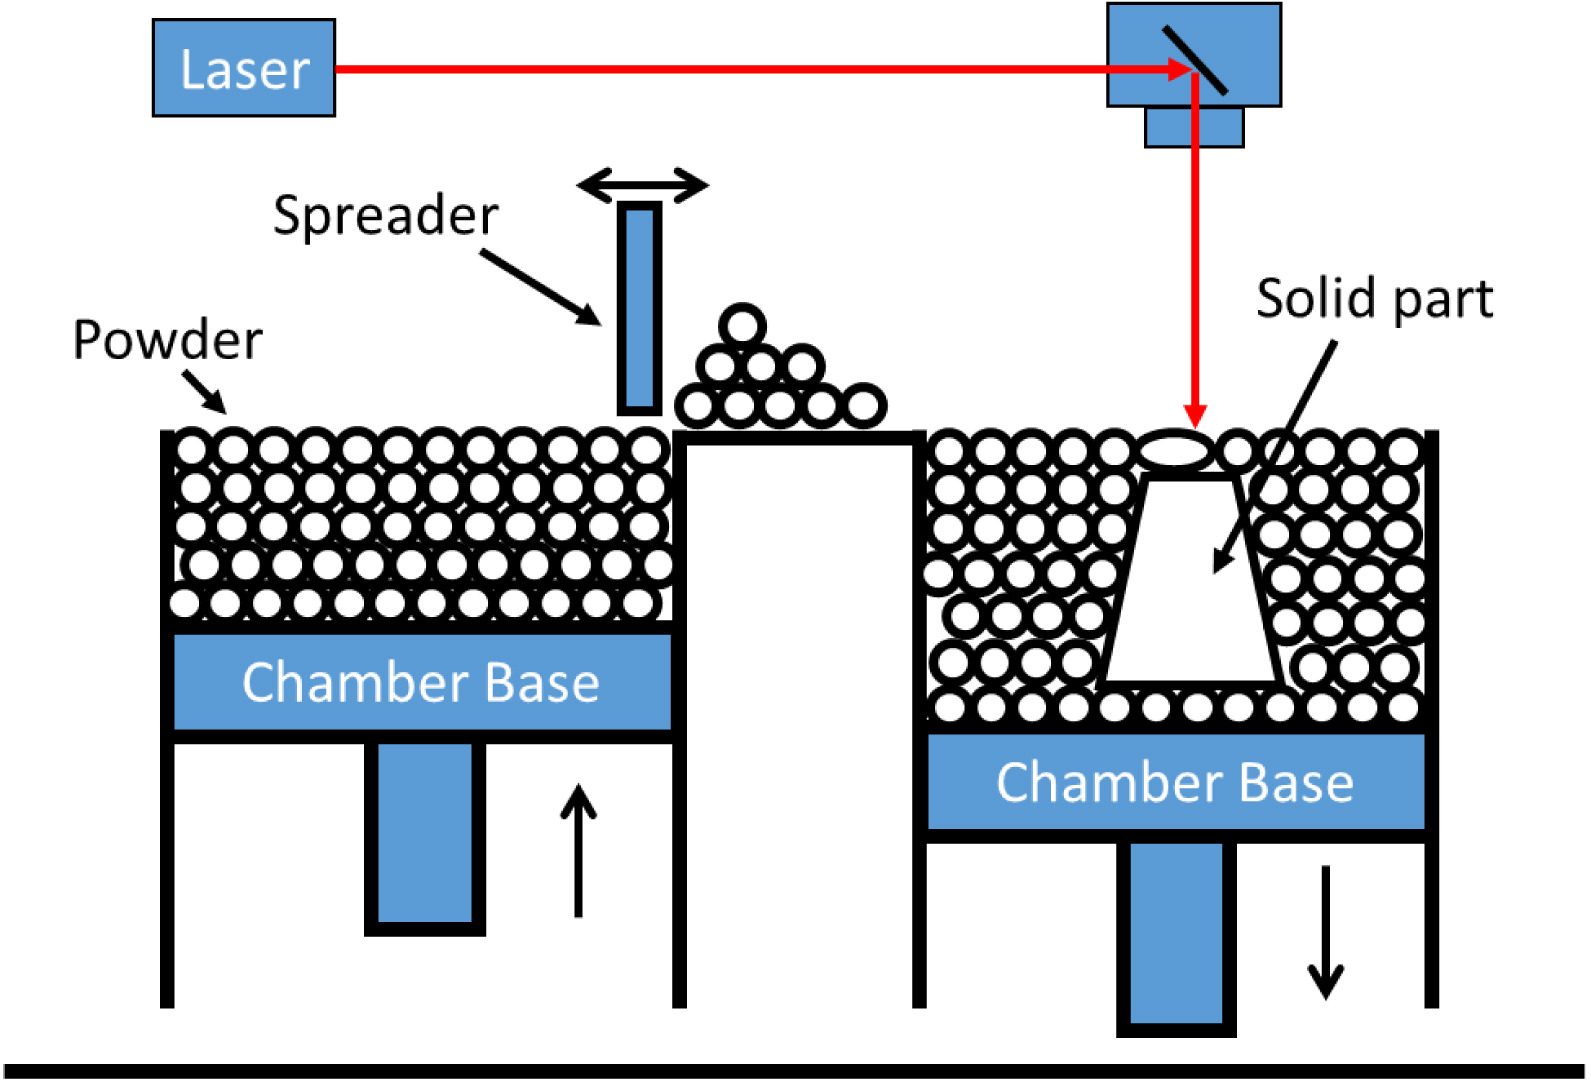 Schematic of the Laser Sintering process recreated based on a literature design from Shackleford et al. (2021). Degradation of Laser Sintered polyamide 12 parts due to accelerated exposure to ultraviolet radiation. Additive Manufacturing. 46, 102132. - Schematic of the Laser Sintering process recreated based on a literature design